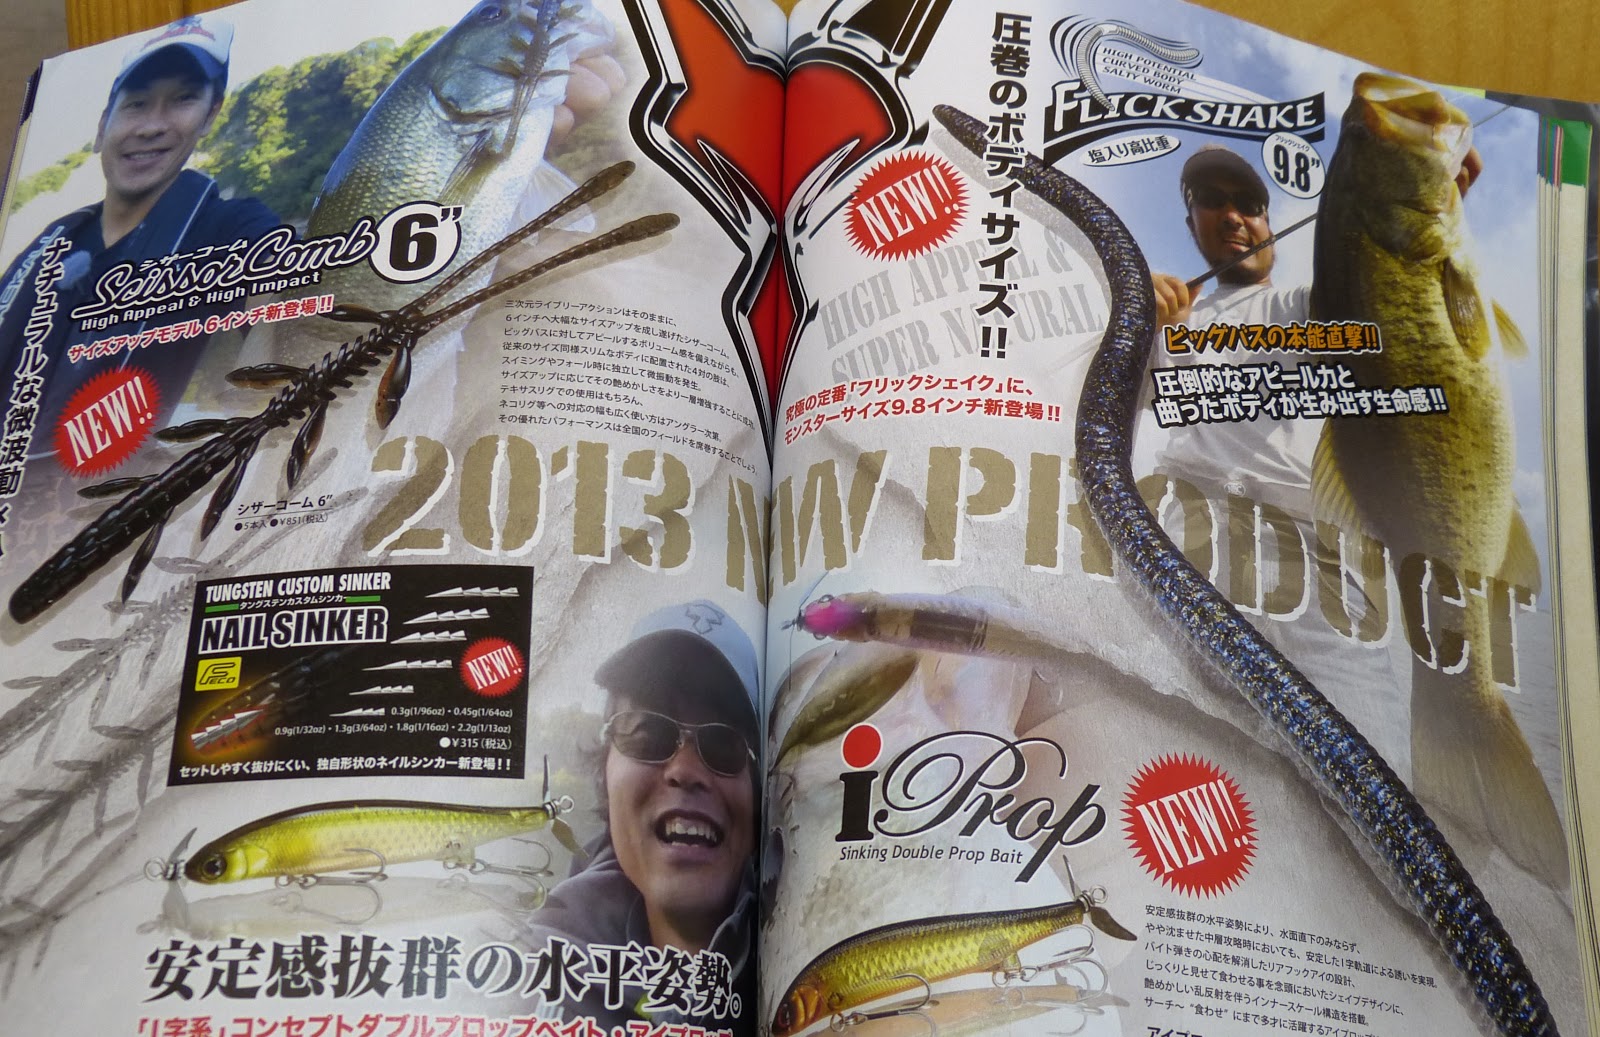 IBASSIN: BASS WORLD LURE BIBLE ARRIVED!